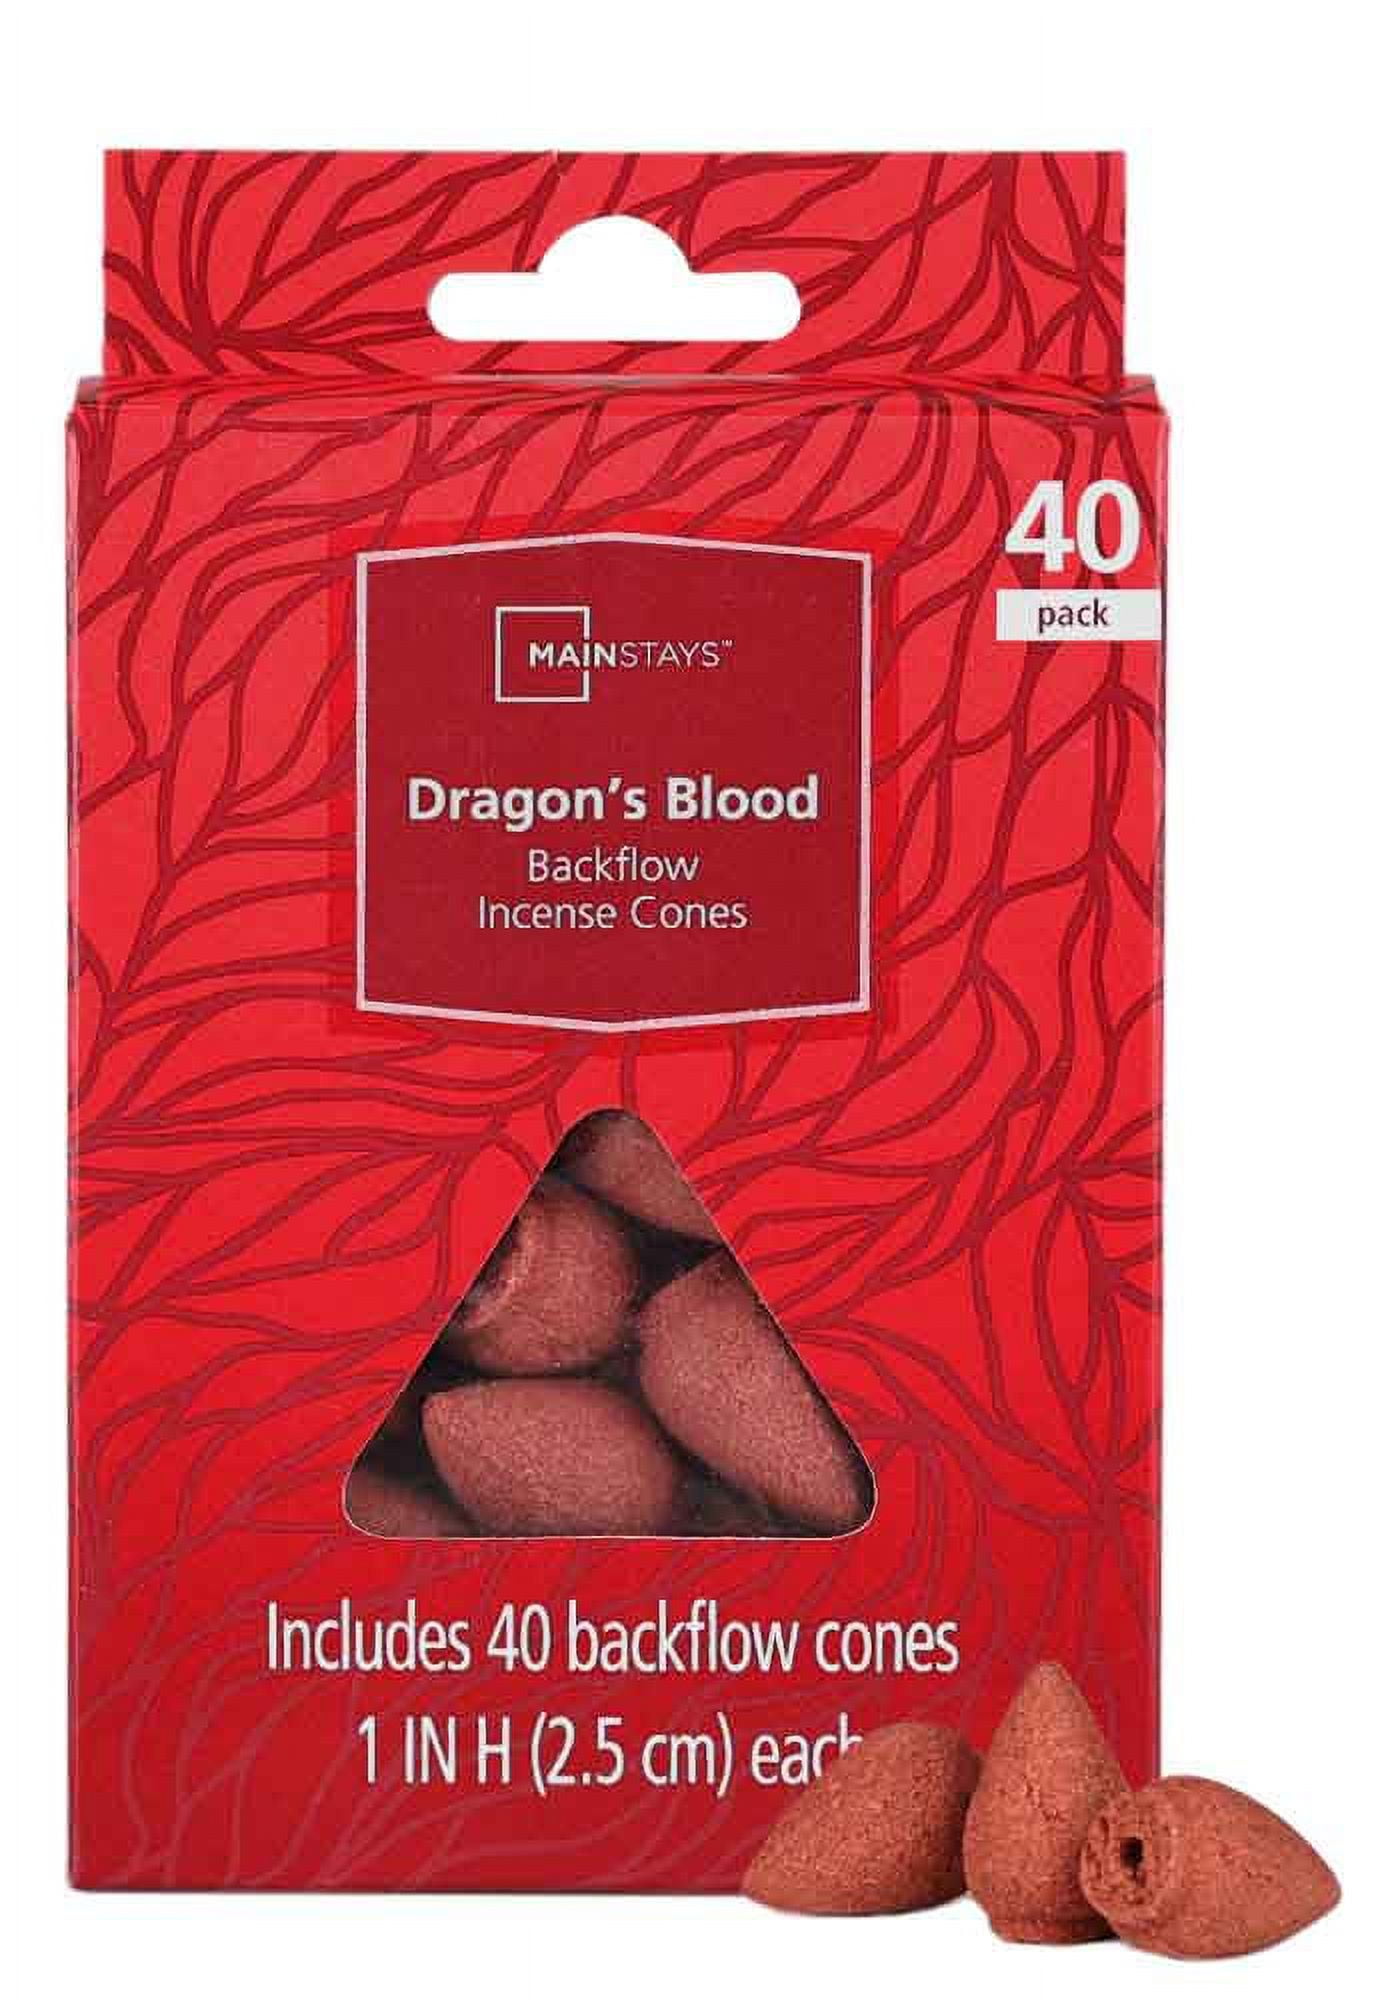 Mainstays Incense Backflow Cones, Dragon's Blood Fragrance (Red), 40 Pack